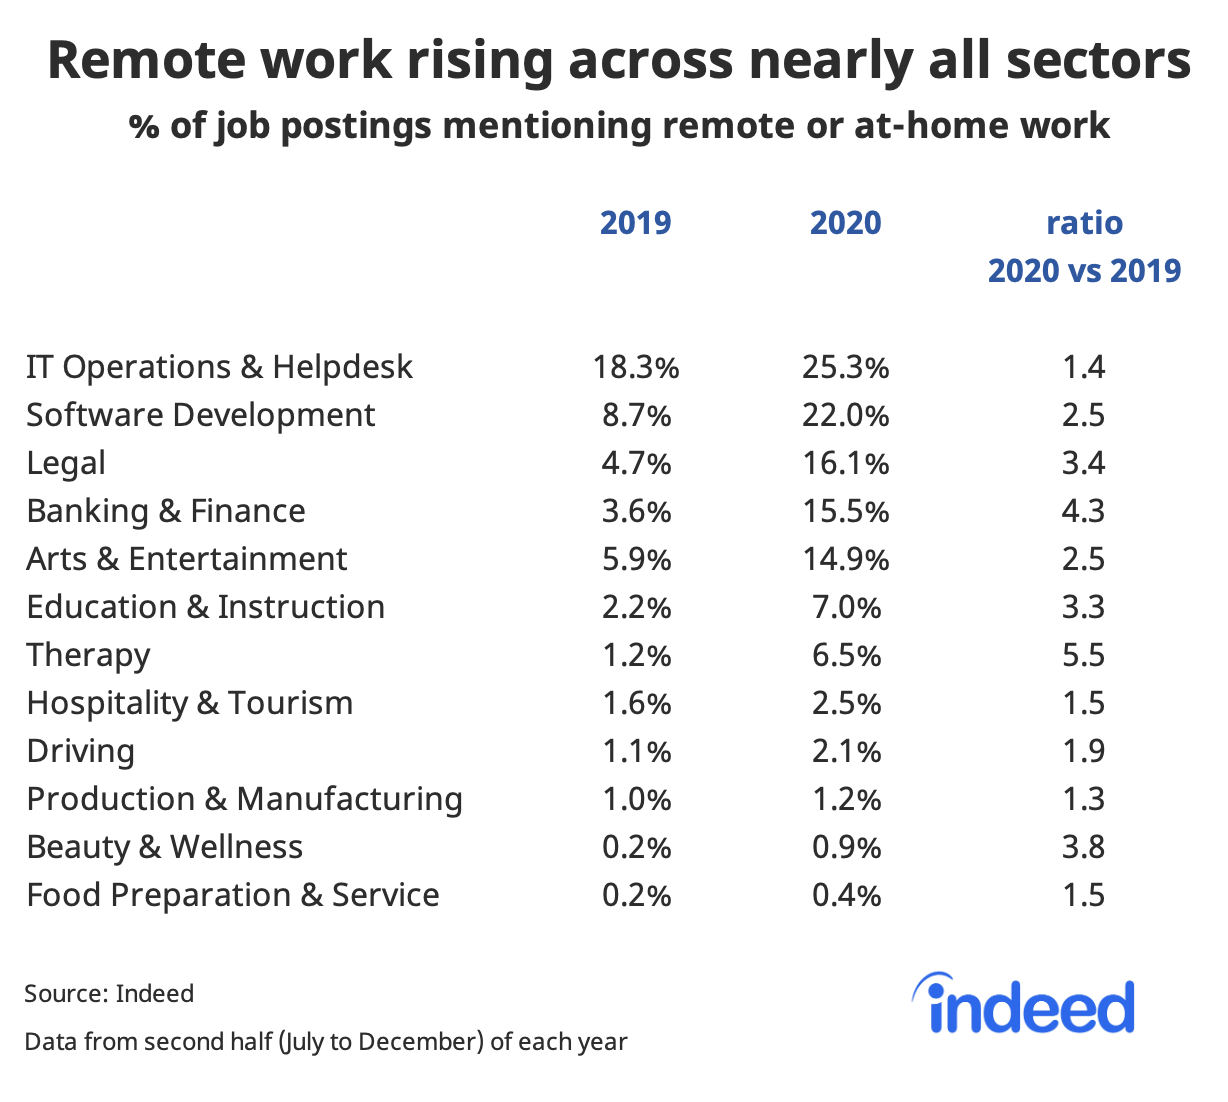 Table showing remote work rising across nearly all sectors